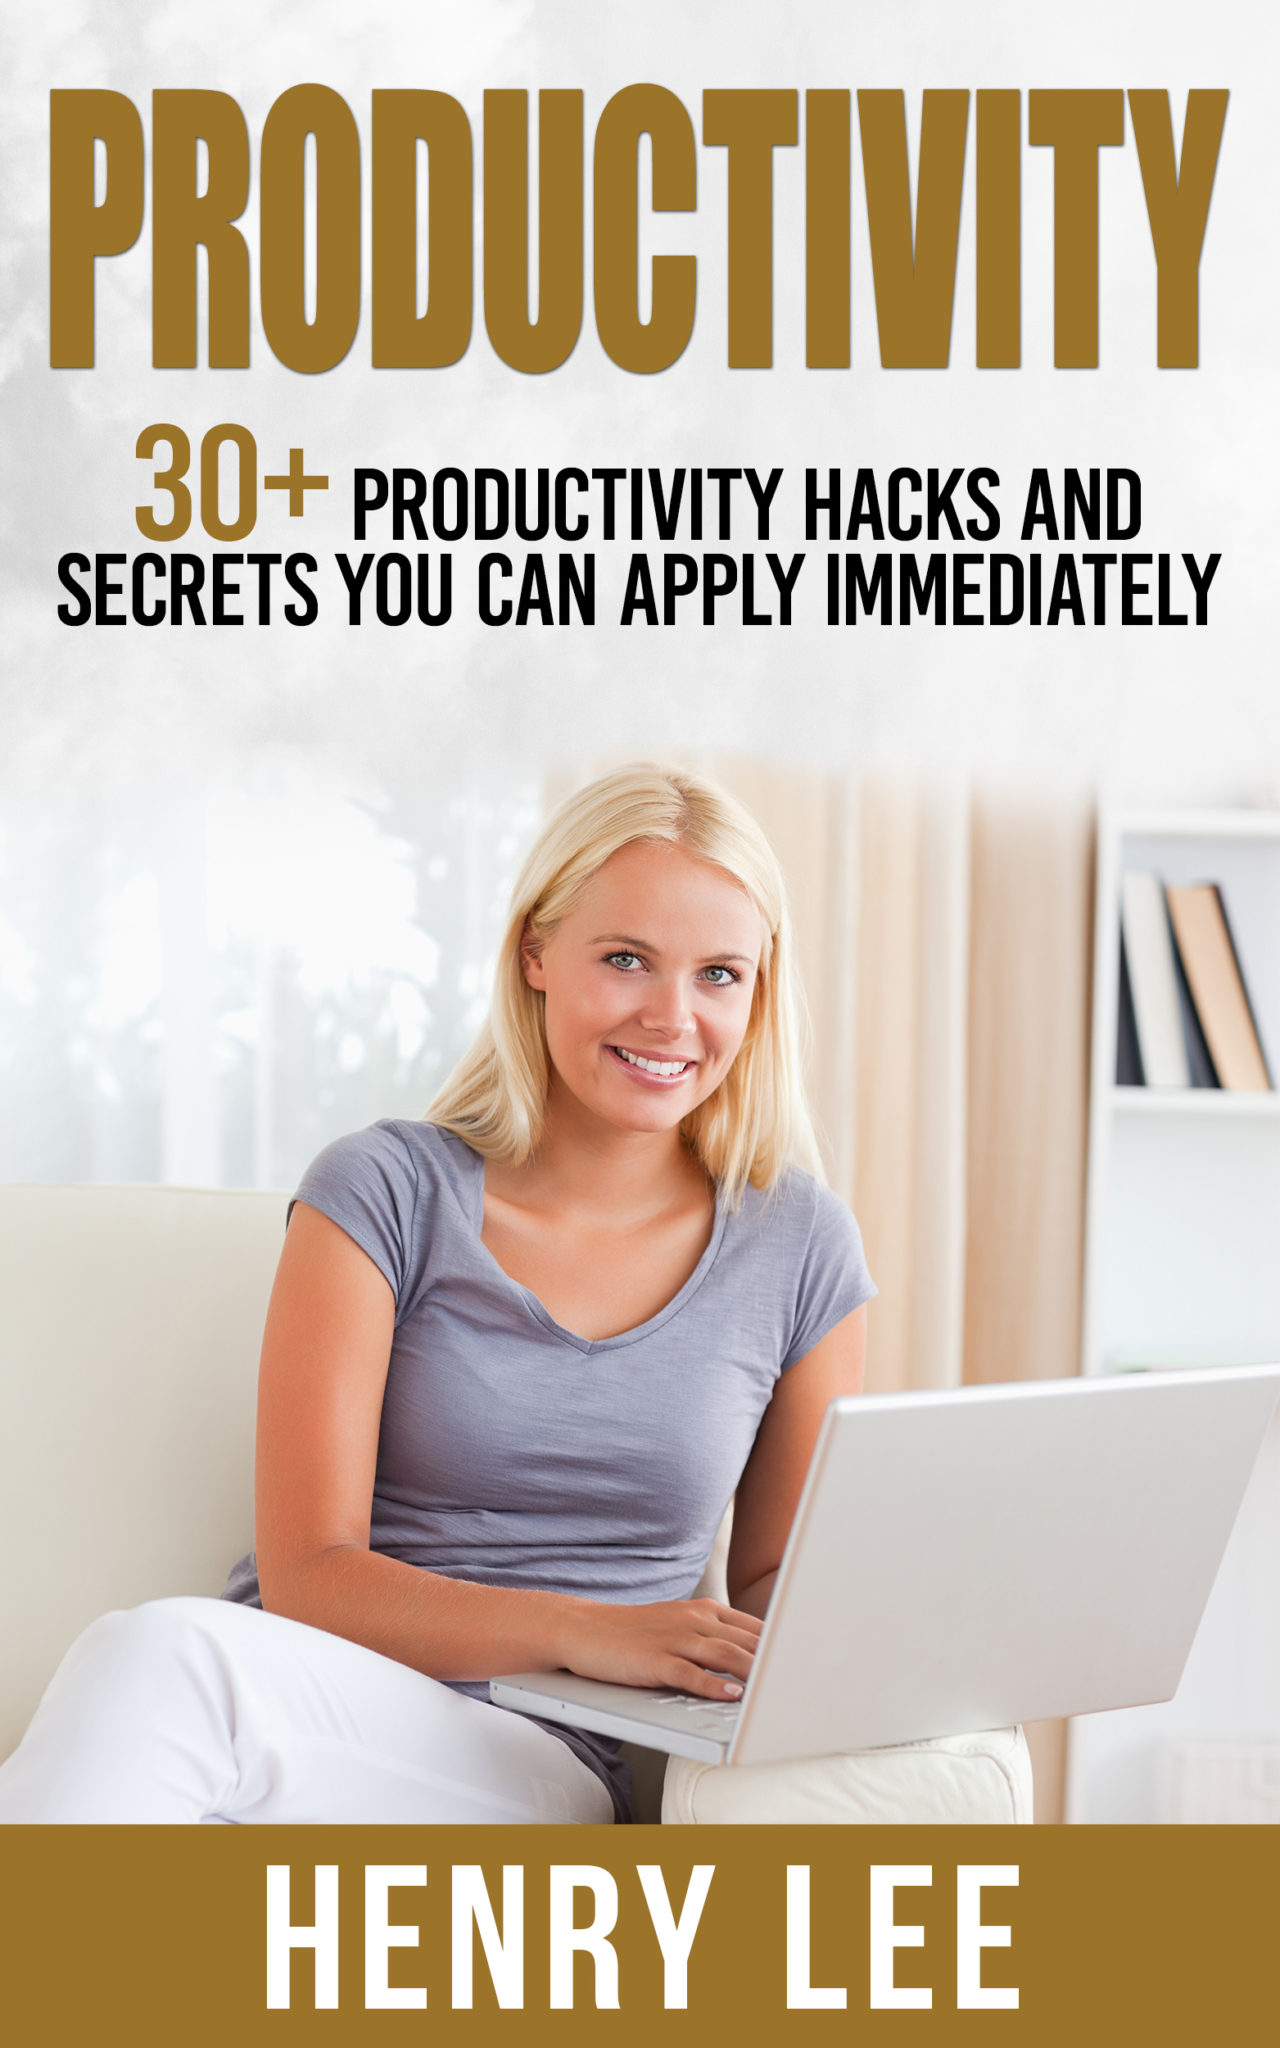 FREE: Productivity: 30+ Productivity Hacks and Secrets You Can Apply Immediately, The Ultimate Time Management and Productivity Guide by Henry Lee